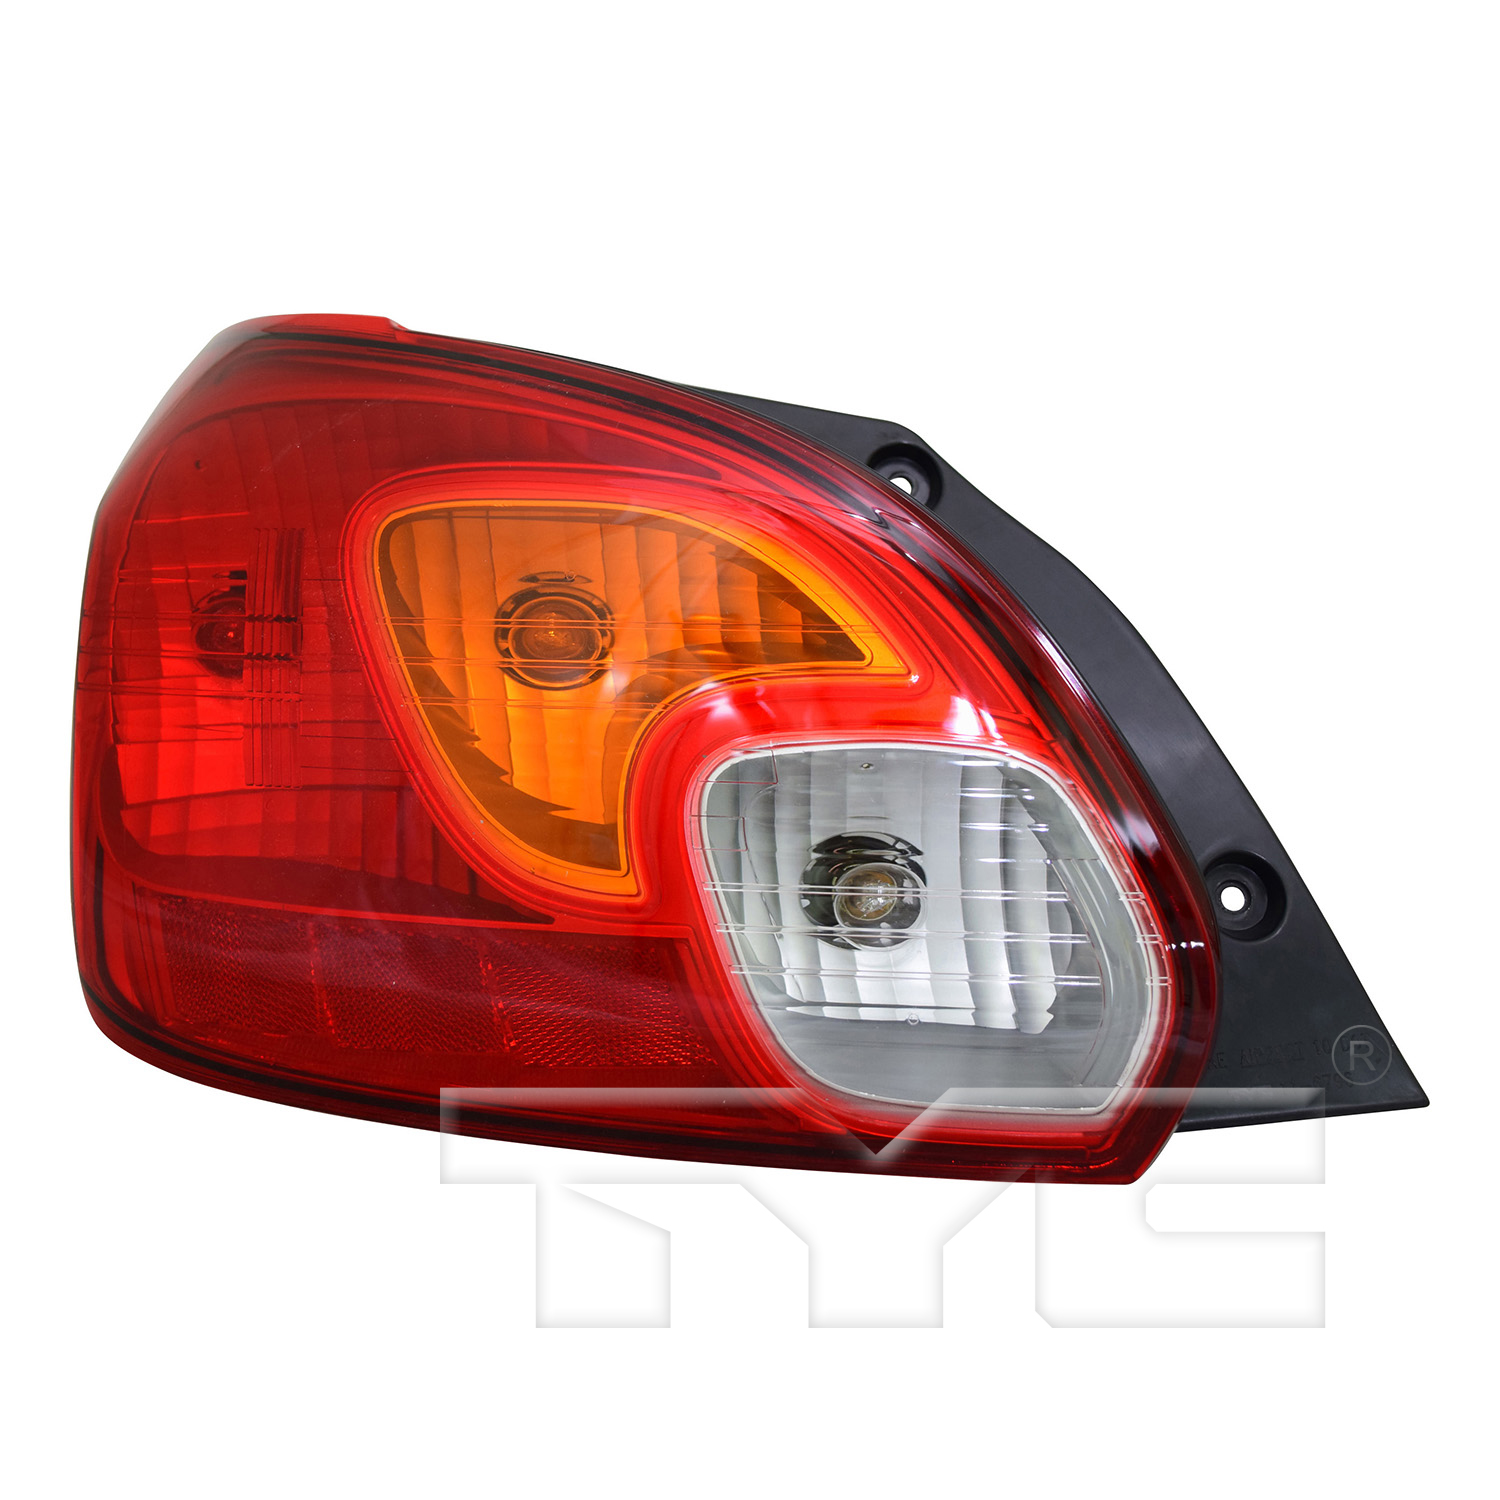 Aftermarket TAILLIGHTS for MITSUBISHI - MIRAGE, MIRAGE,14-15,LT Taillamp assy